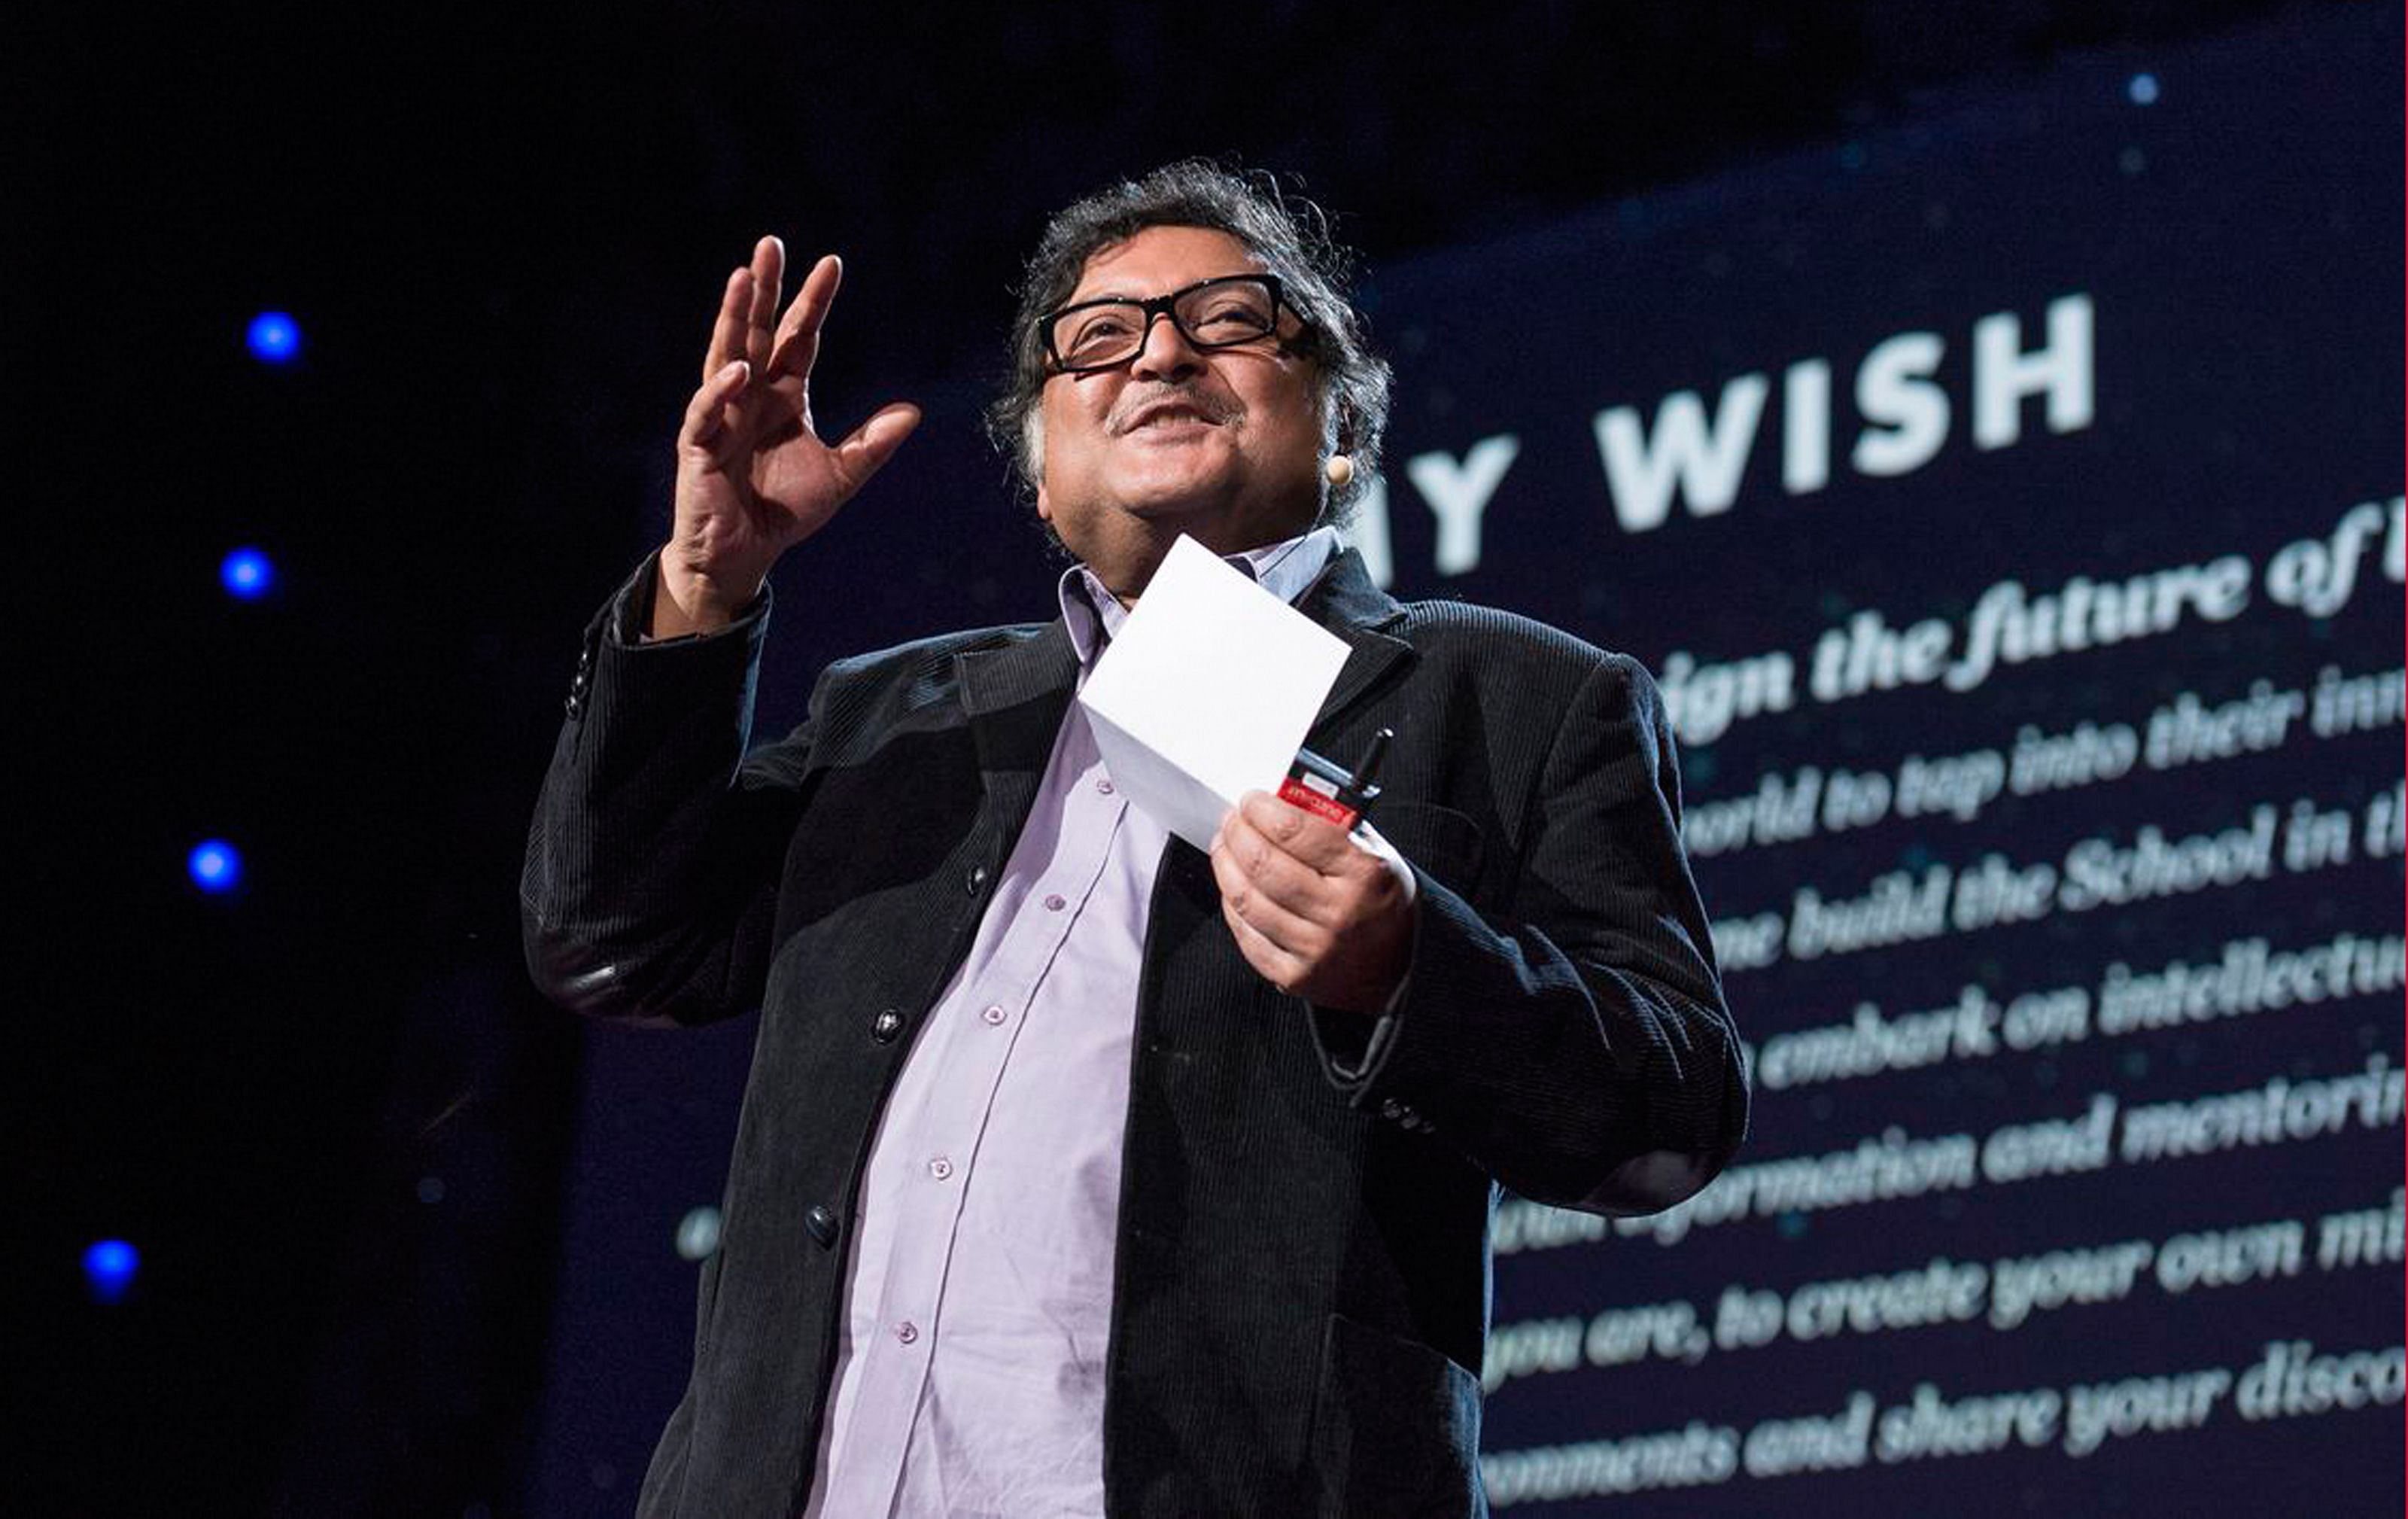 TED prize winner Sugata Mitra in Long Beach, California. Sugata Mitra on February 26, was awarded a one million USD TED Prize to pursue the promise of building schools in the Internet cloud where young minds can learn unfettered by grown-ups. AFP